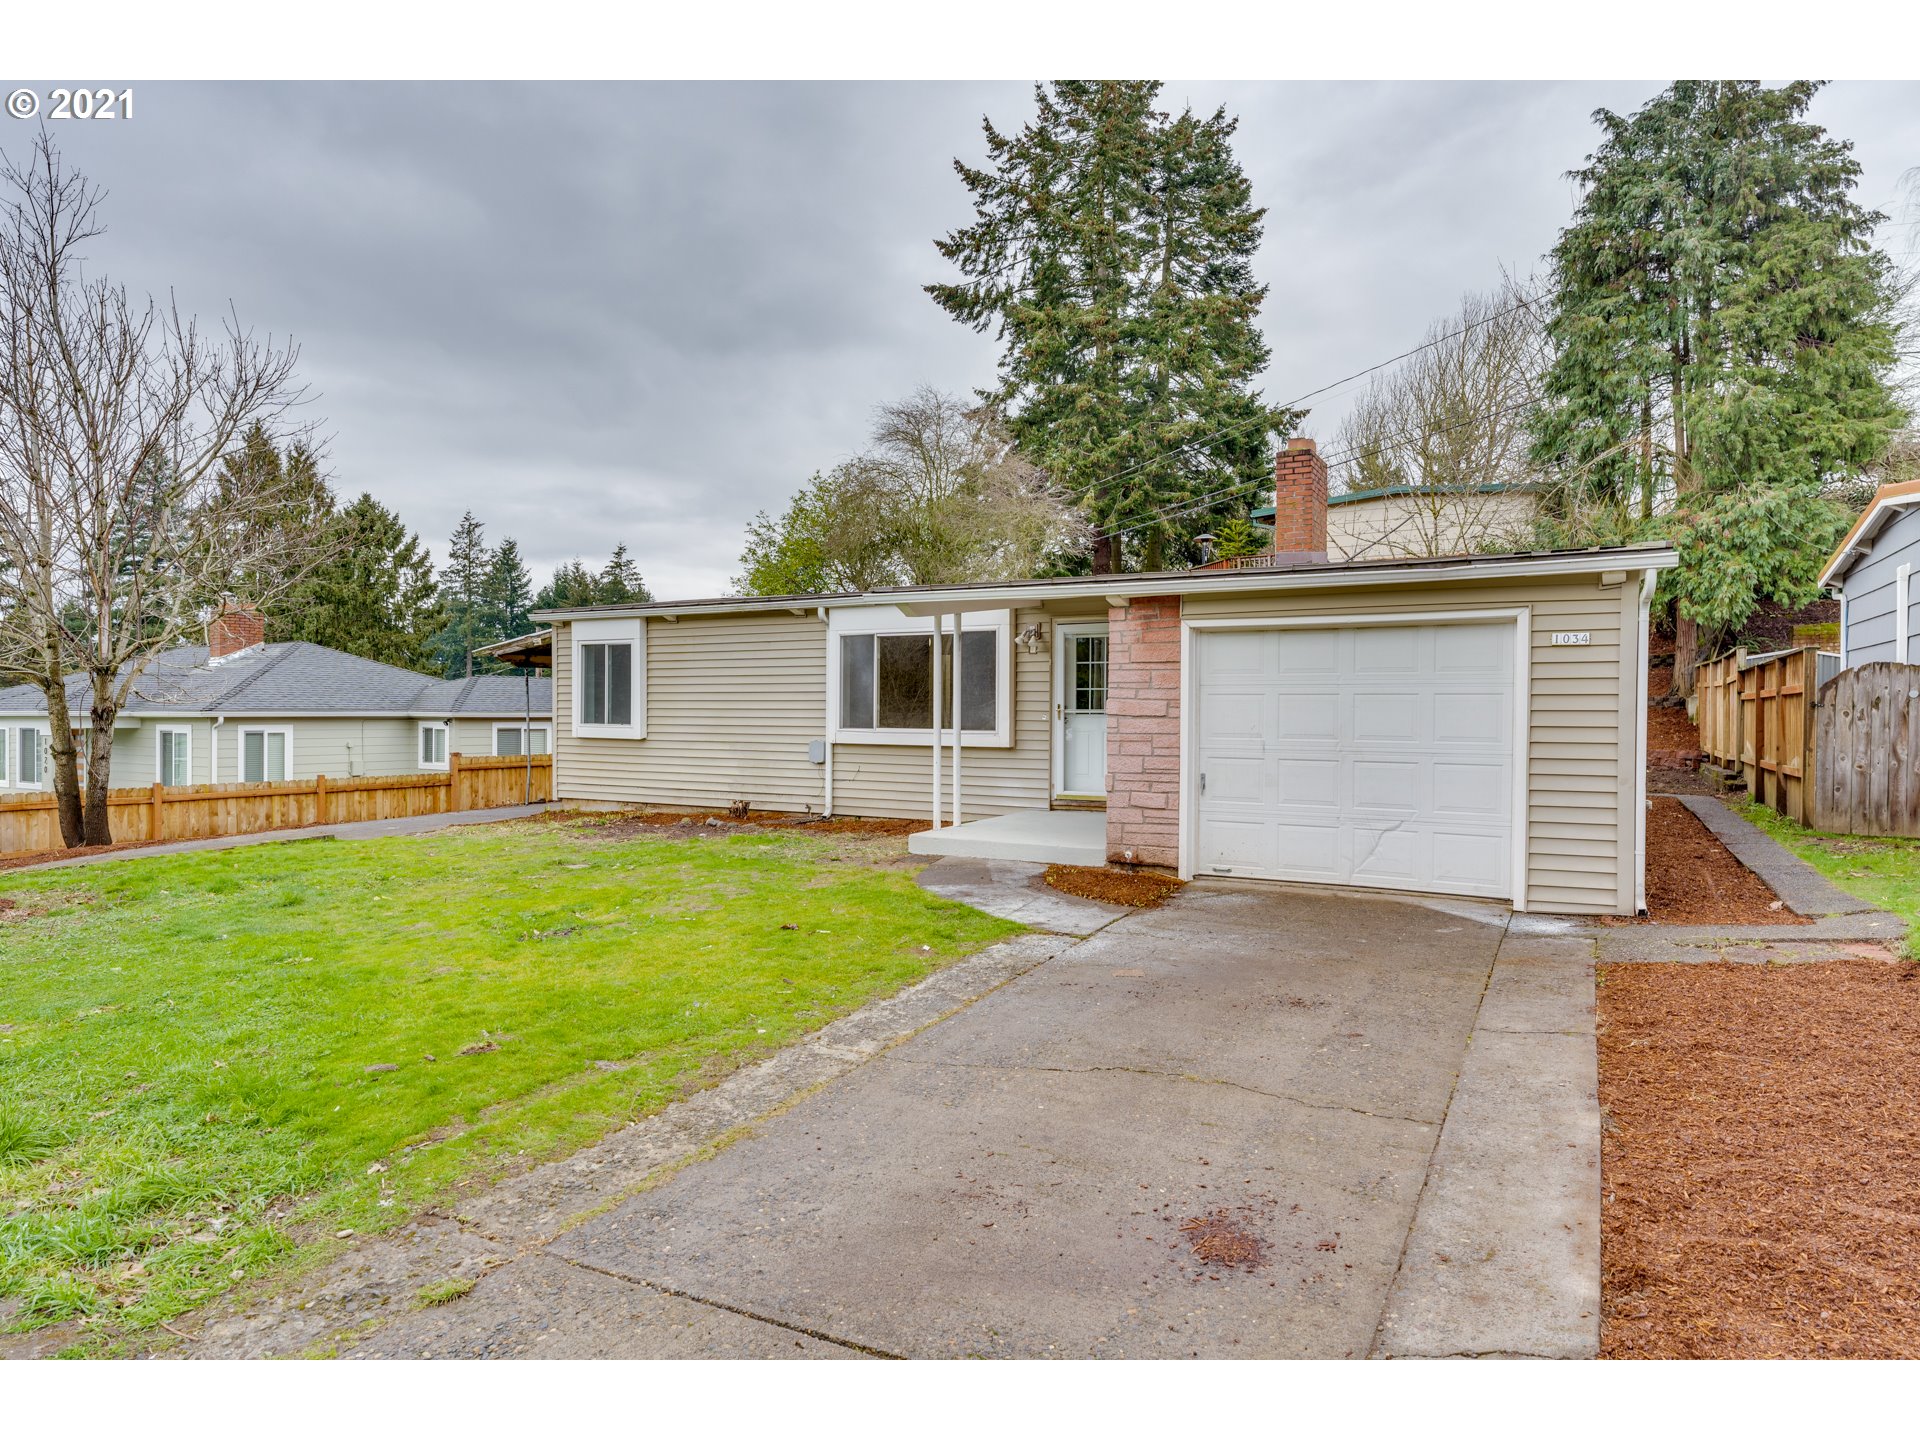 1034 SE 113TH AVE (1 of 32)